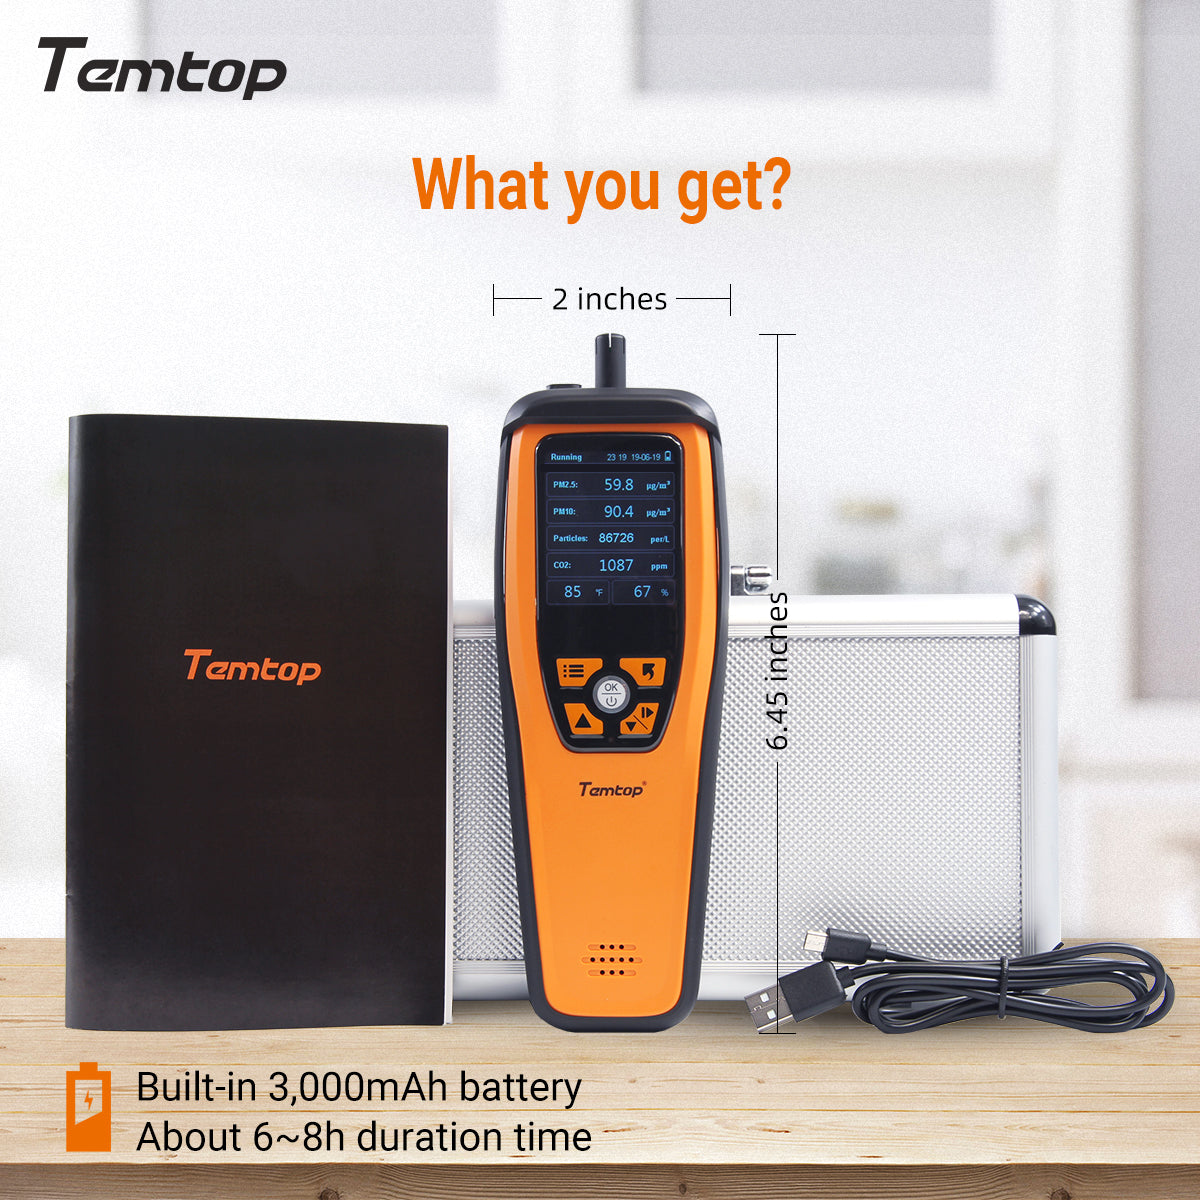 Temtop M2000C 2nd CO2 Air Quality Monitor for CO2 PM2.5 PM10 Particles, Temperature & Humidity Display, Data Export